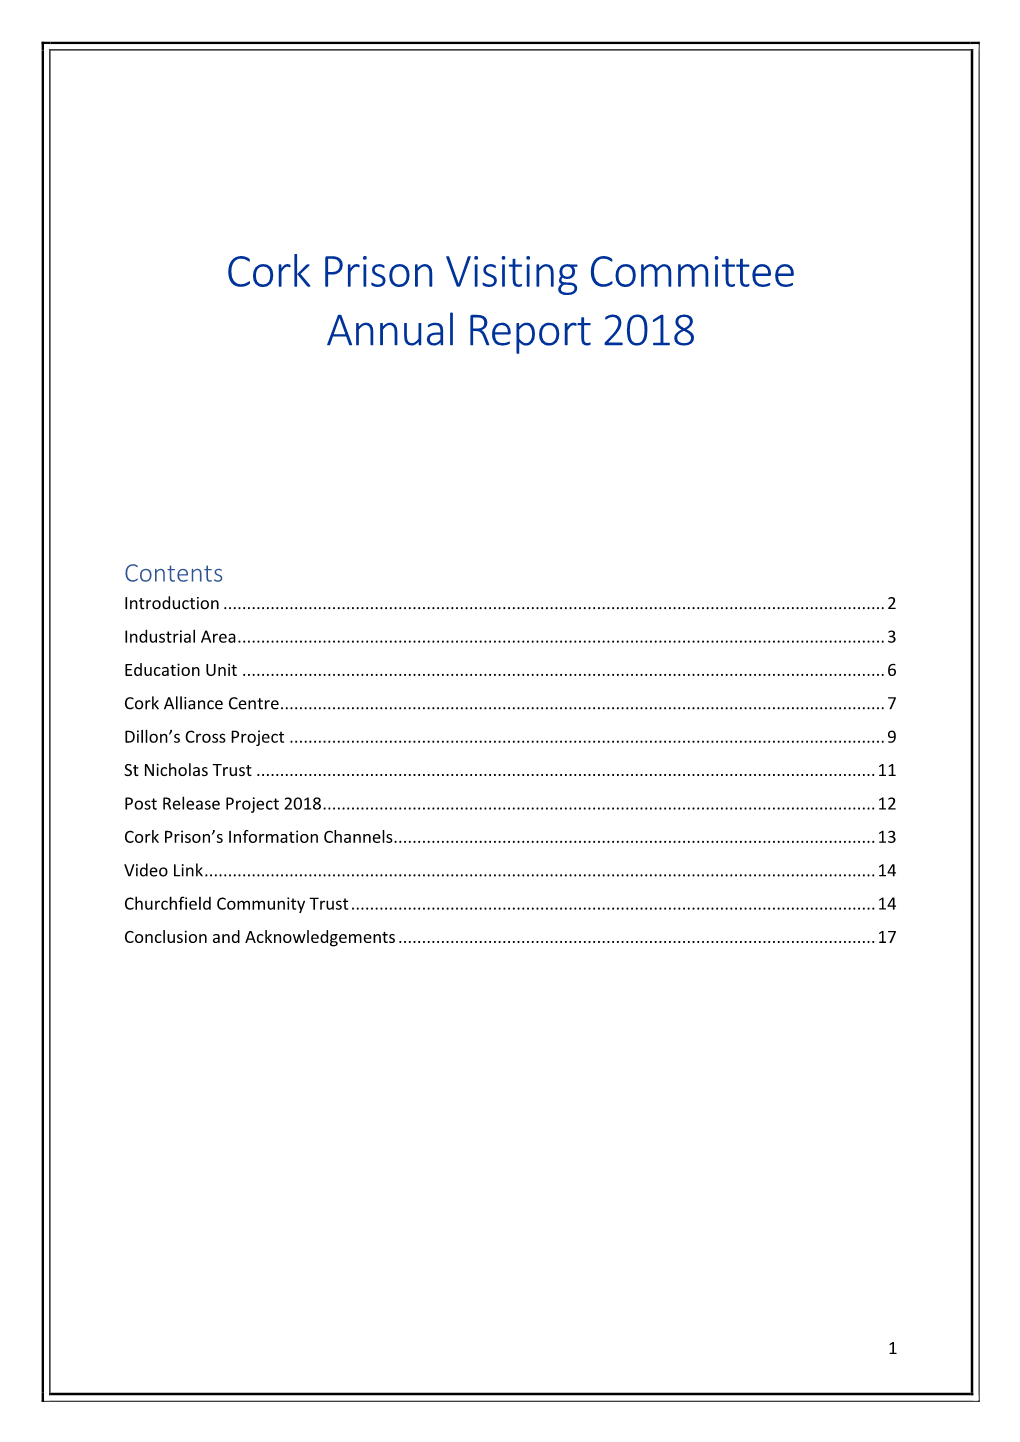 Cork Prison Visiting Committee Annual Report 2018